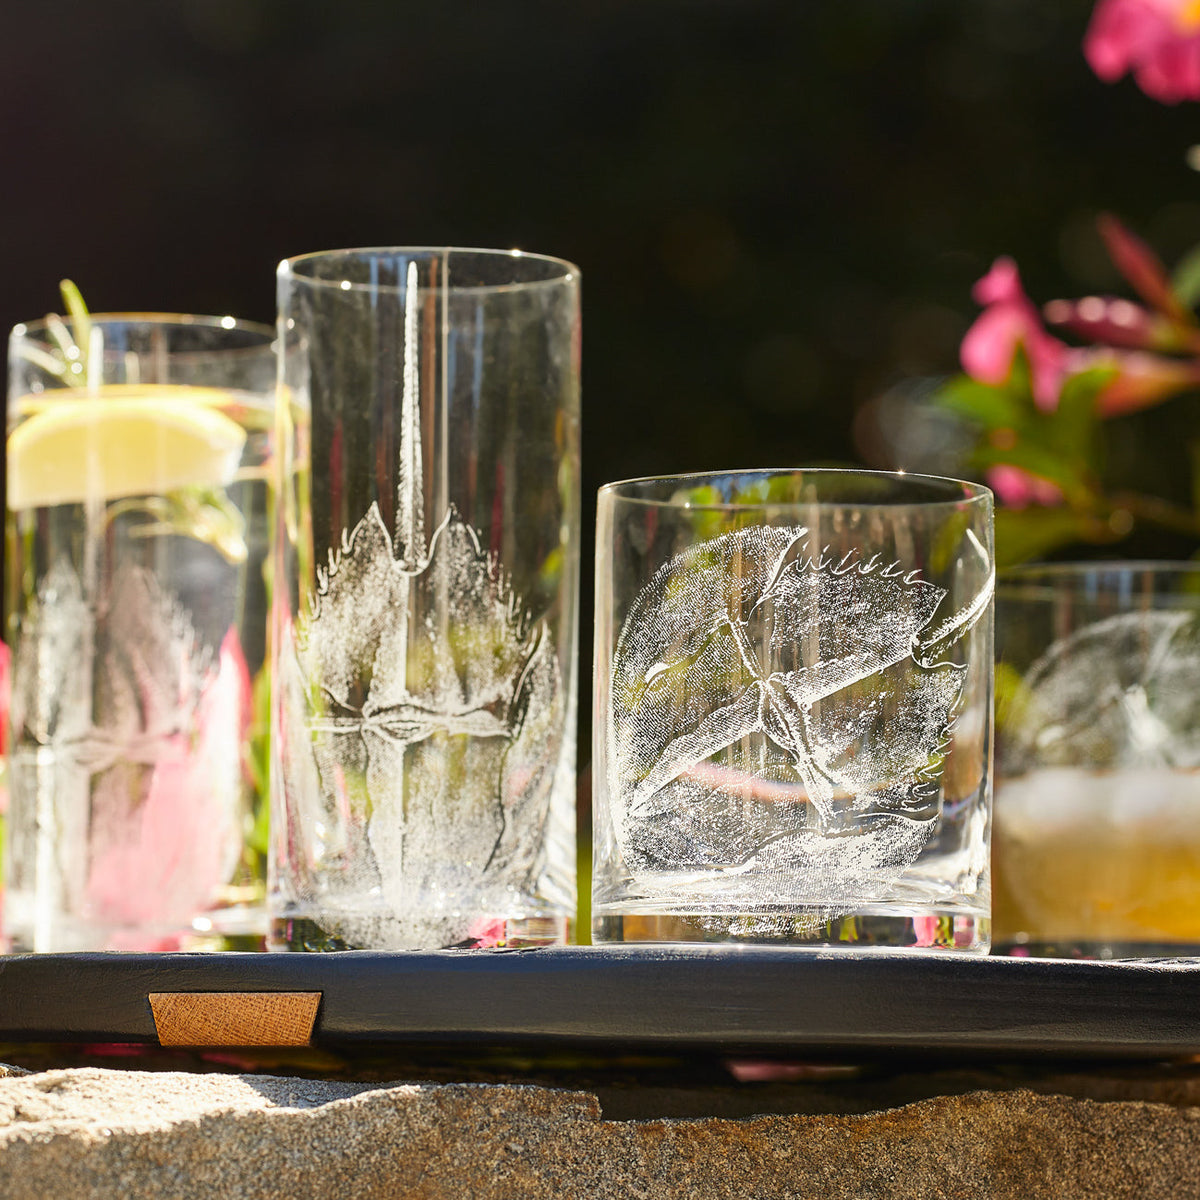 A set of Horseshoe Crab Highball Glasses by Caskata on a tray with flowers.